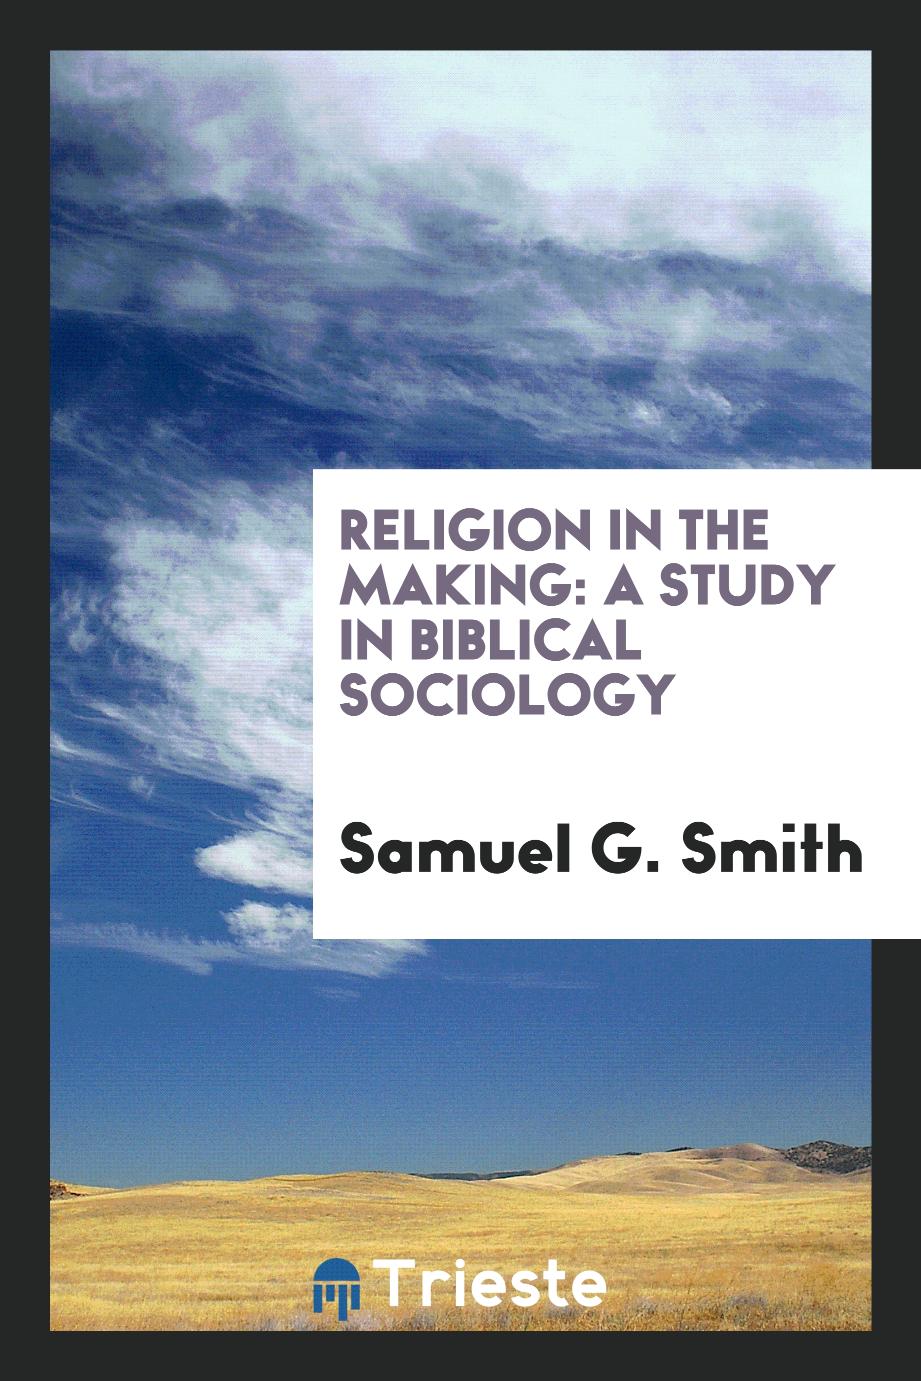 Religion in the making: a study in Biblical sociology